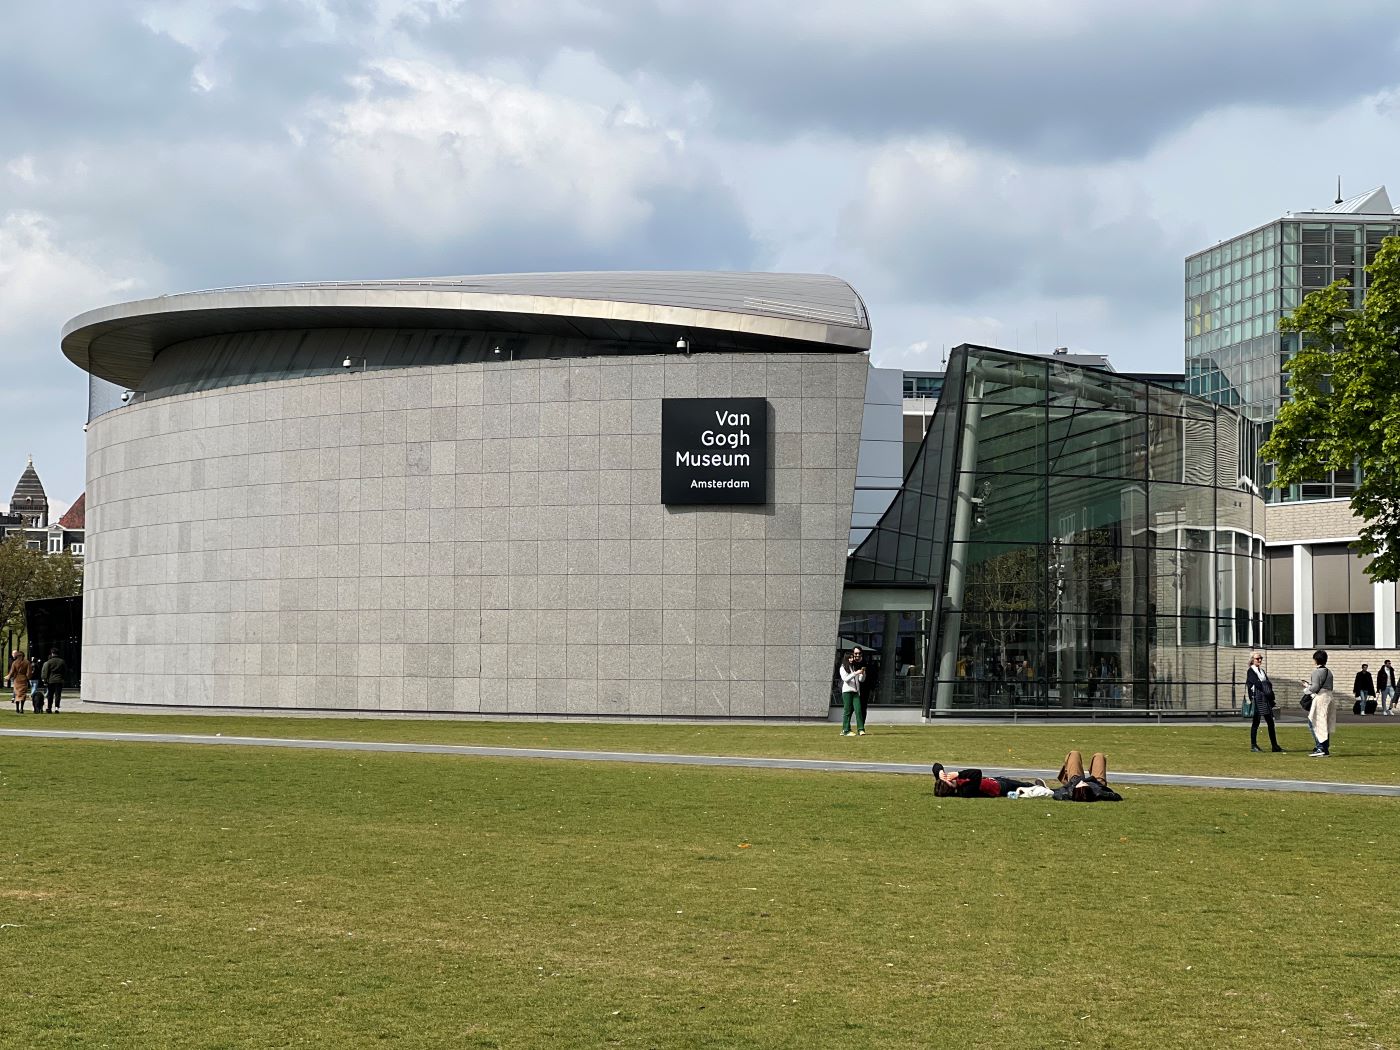 Van Gogh Museum. Amsterdam, The Netherlands. Credit: Carry on Caro